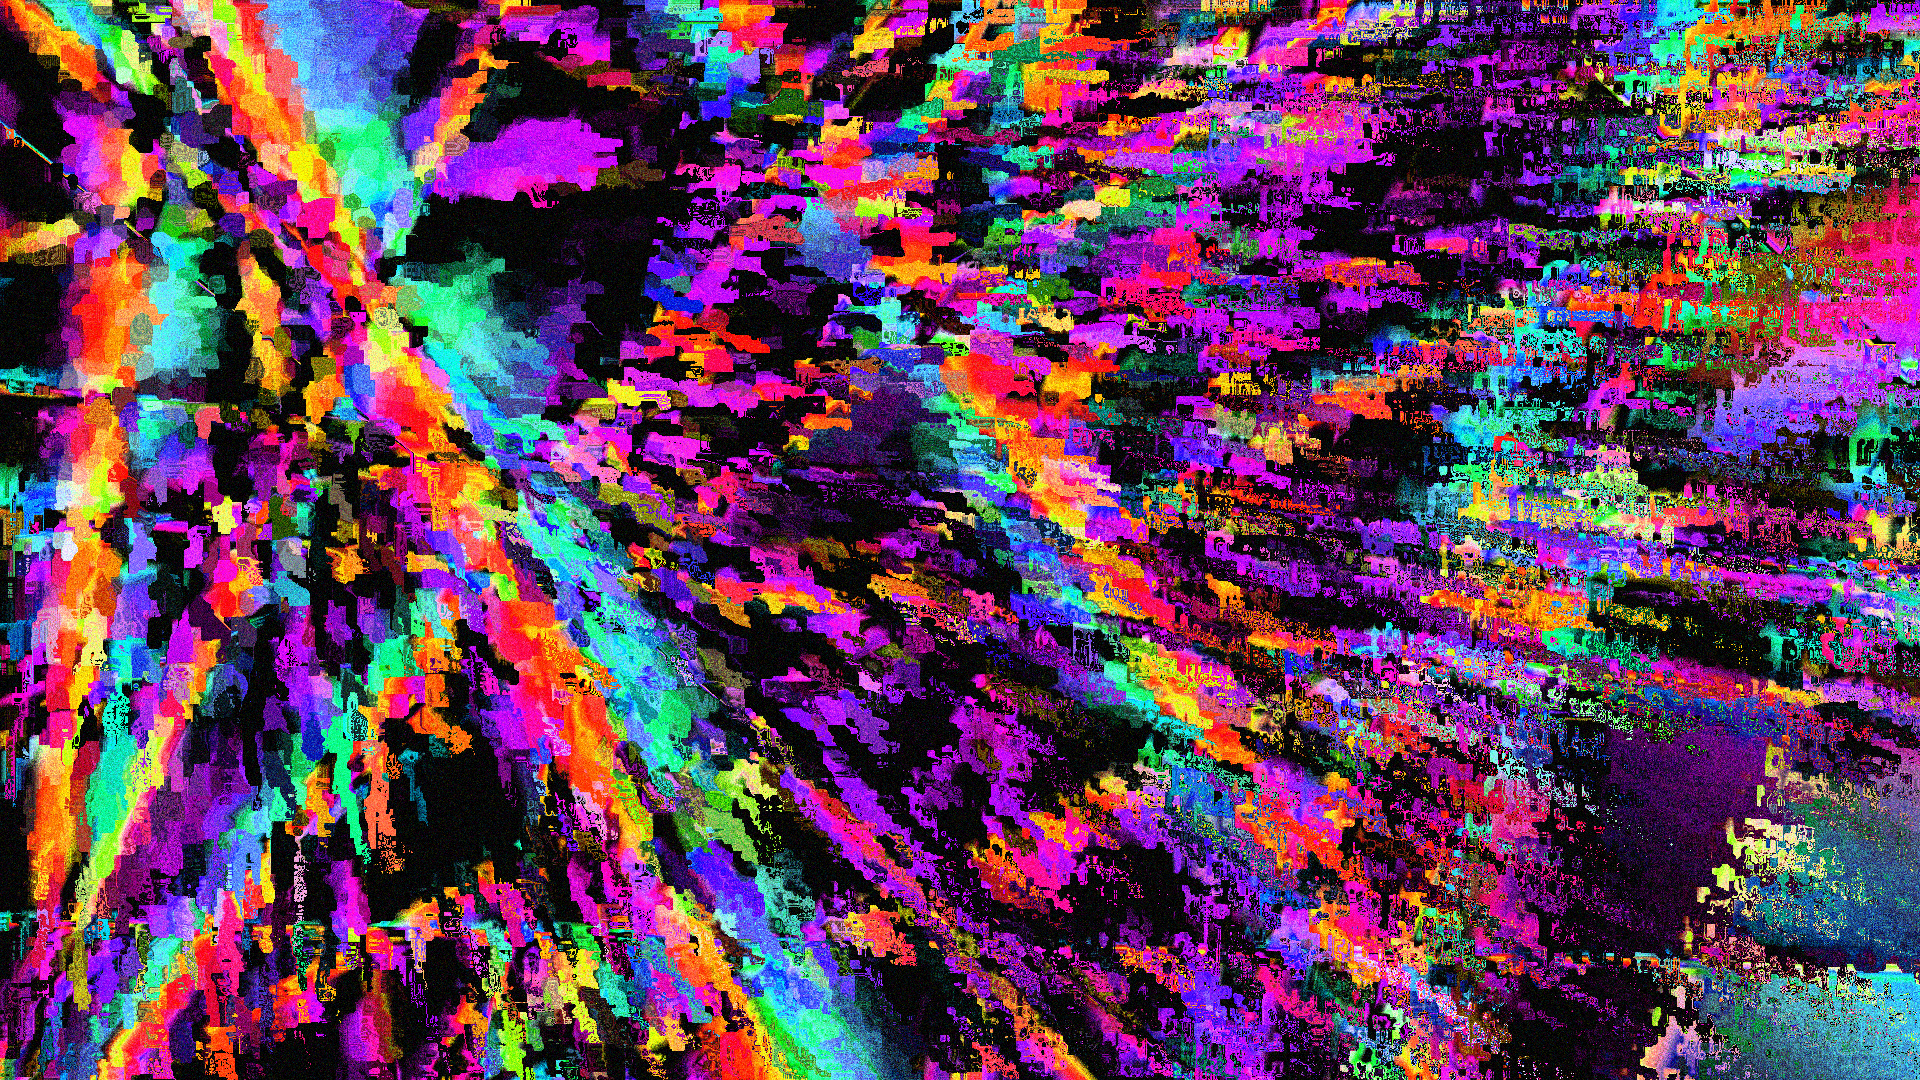 General 1920x1080 abstract colorful vibrant digital art glitch art artwork purple iridescent psychedelic